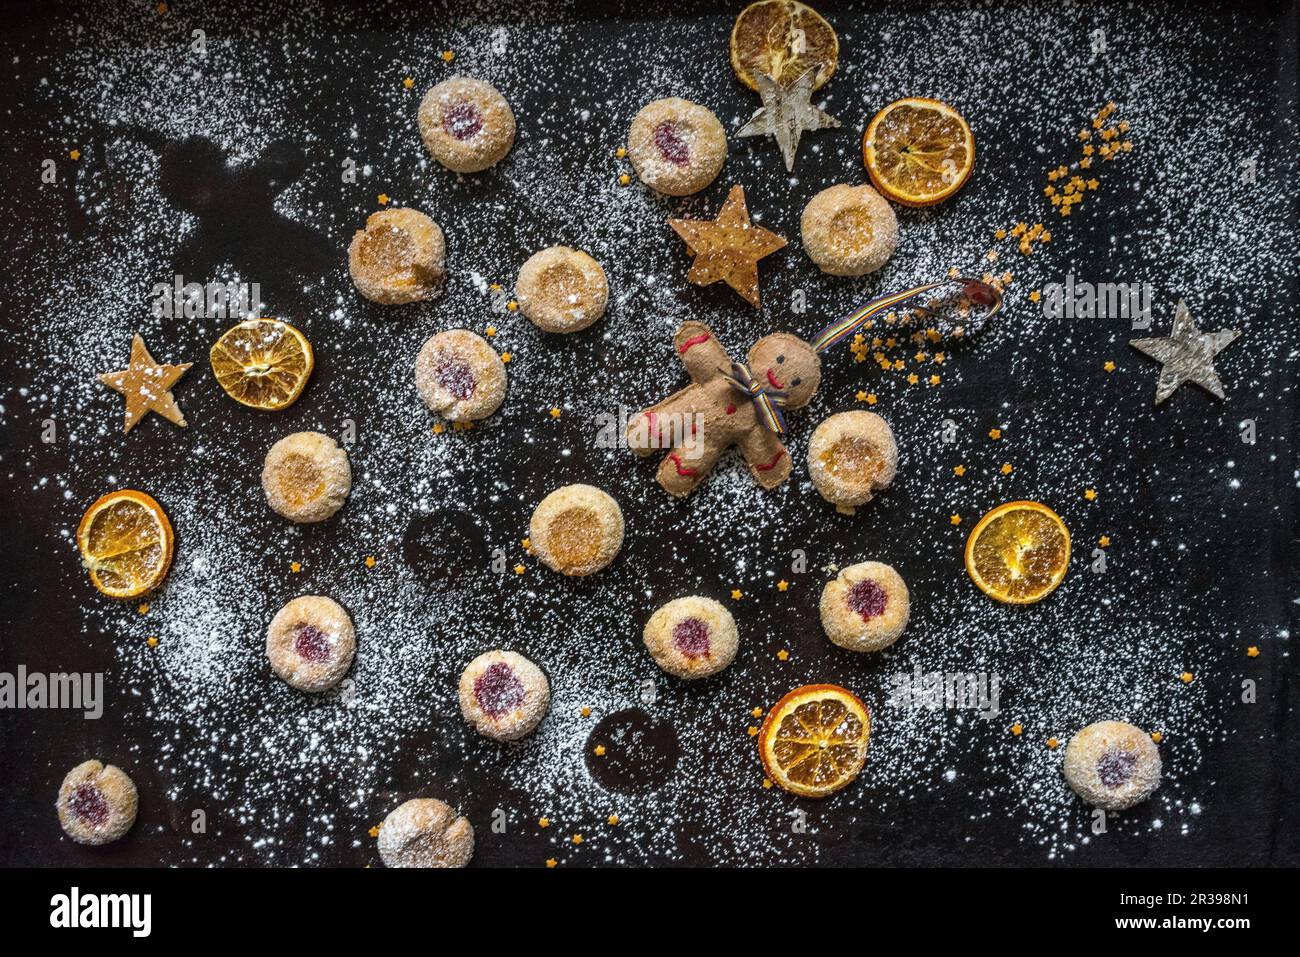 Shortbread jam biscuits with orange slices, stars and a Christmas figure Stock Photo